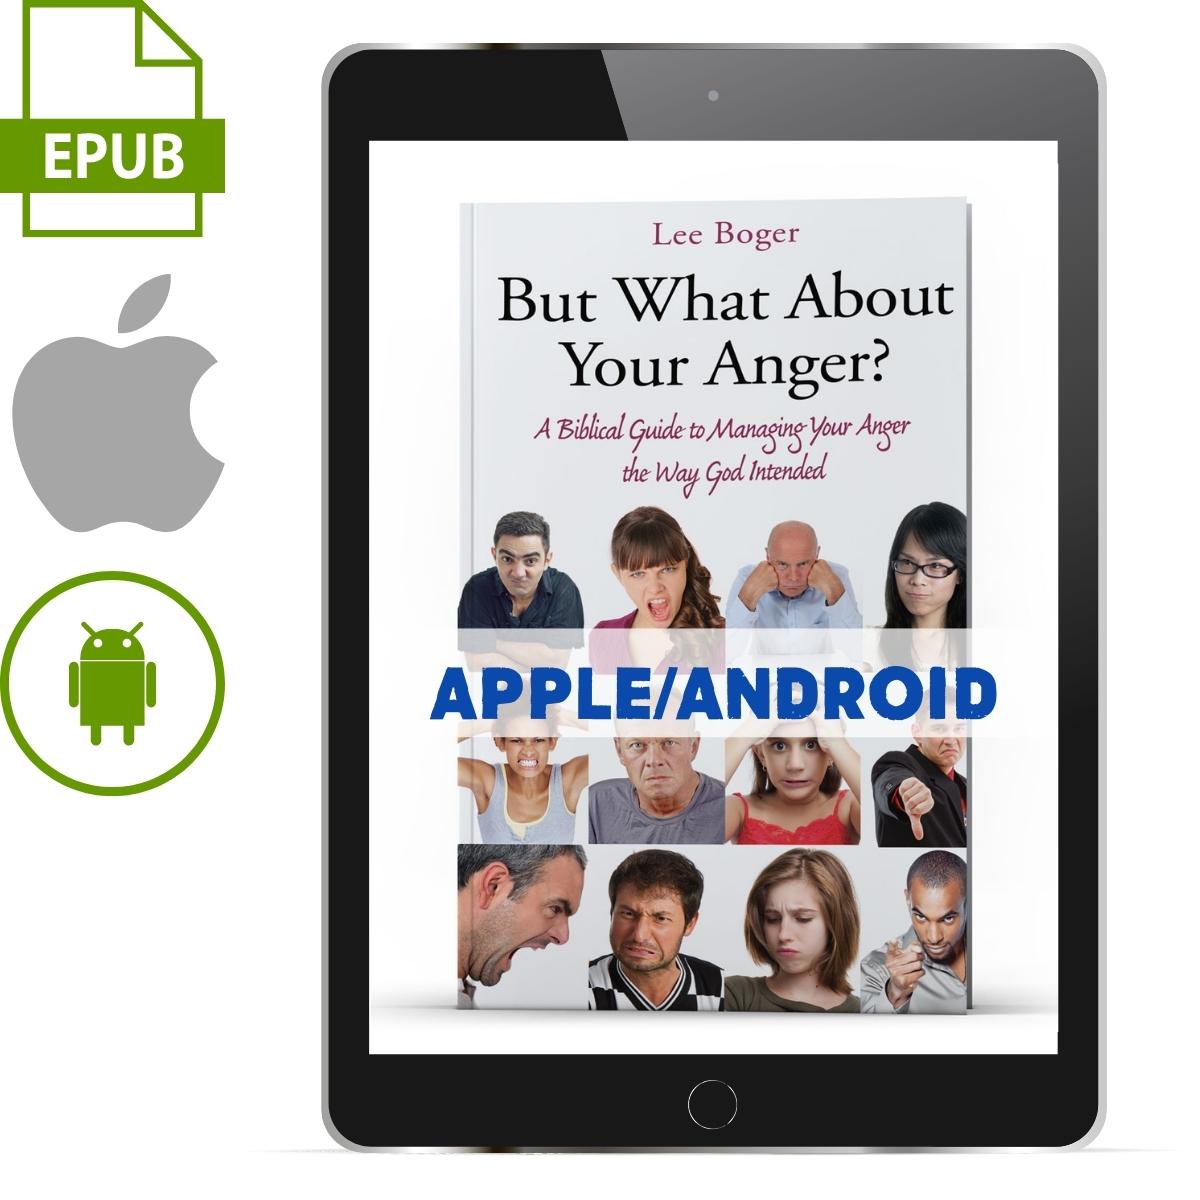 But What About Your Anger? A Biblical Guide to Managing Your Anger (Apple/Android Version) - Illumination Publishers